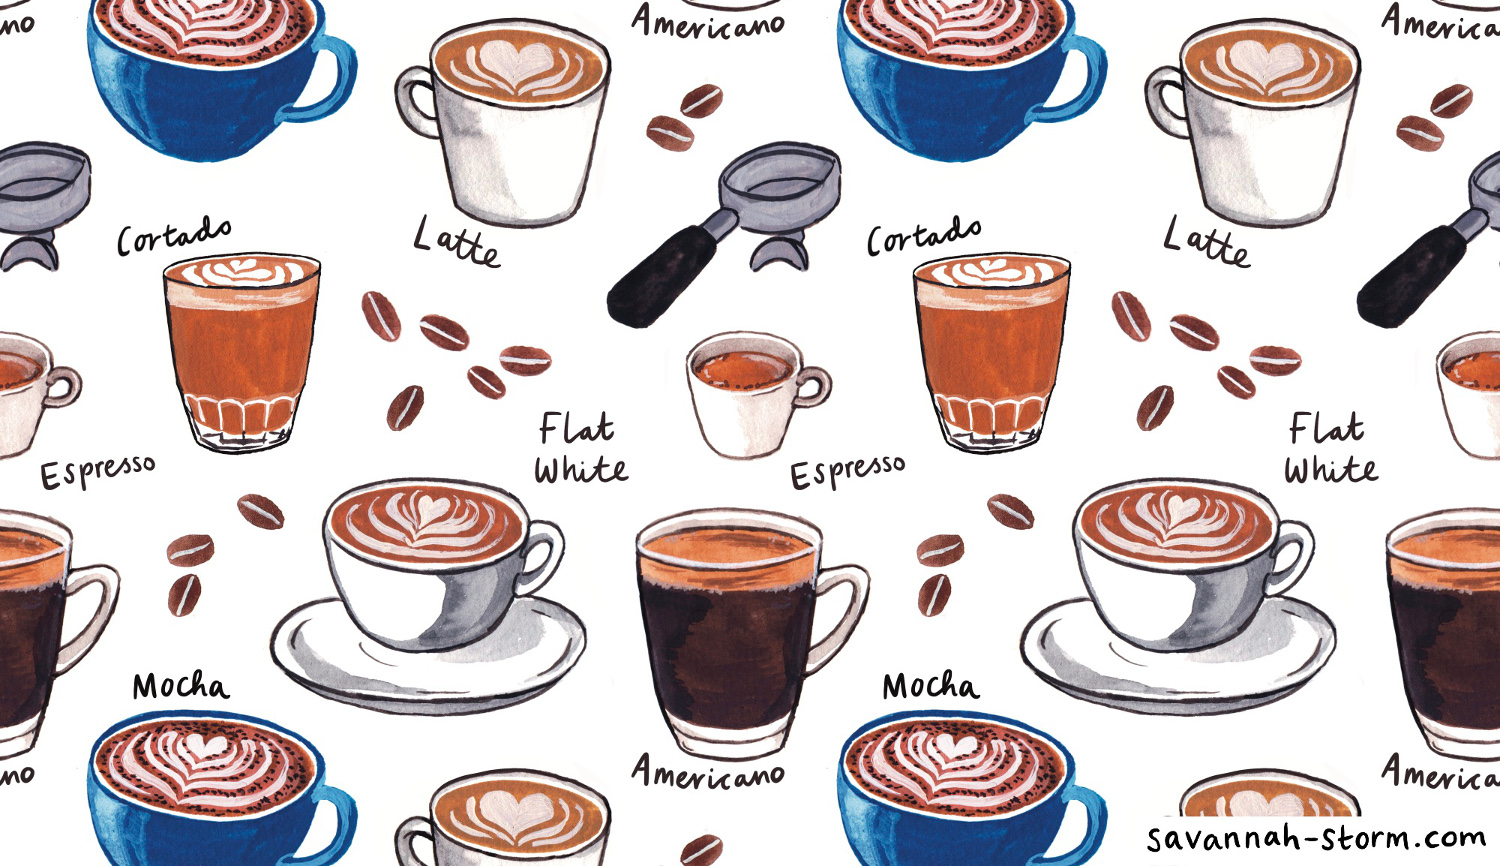 A repeating pattern on a white background of coffee cups, coffee beans and handwritten text saying 'Americano' 'Mocha' 'Flat White' 'Latte' 'Espresso'.